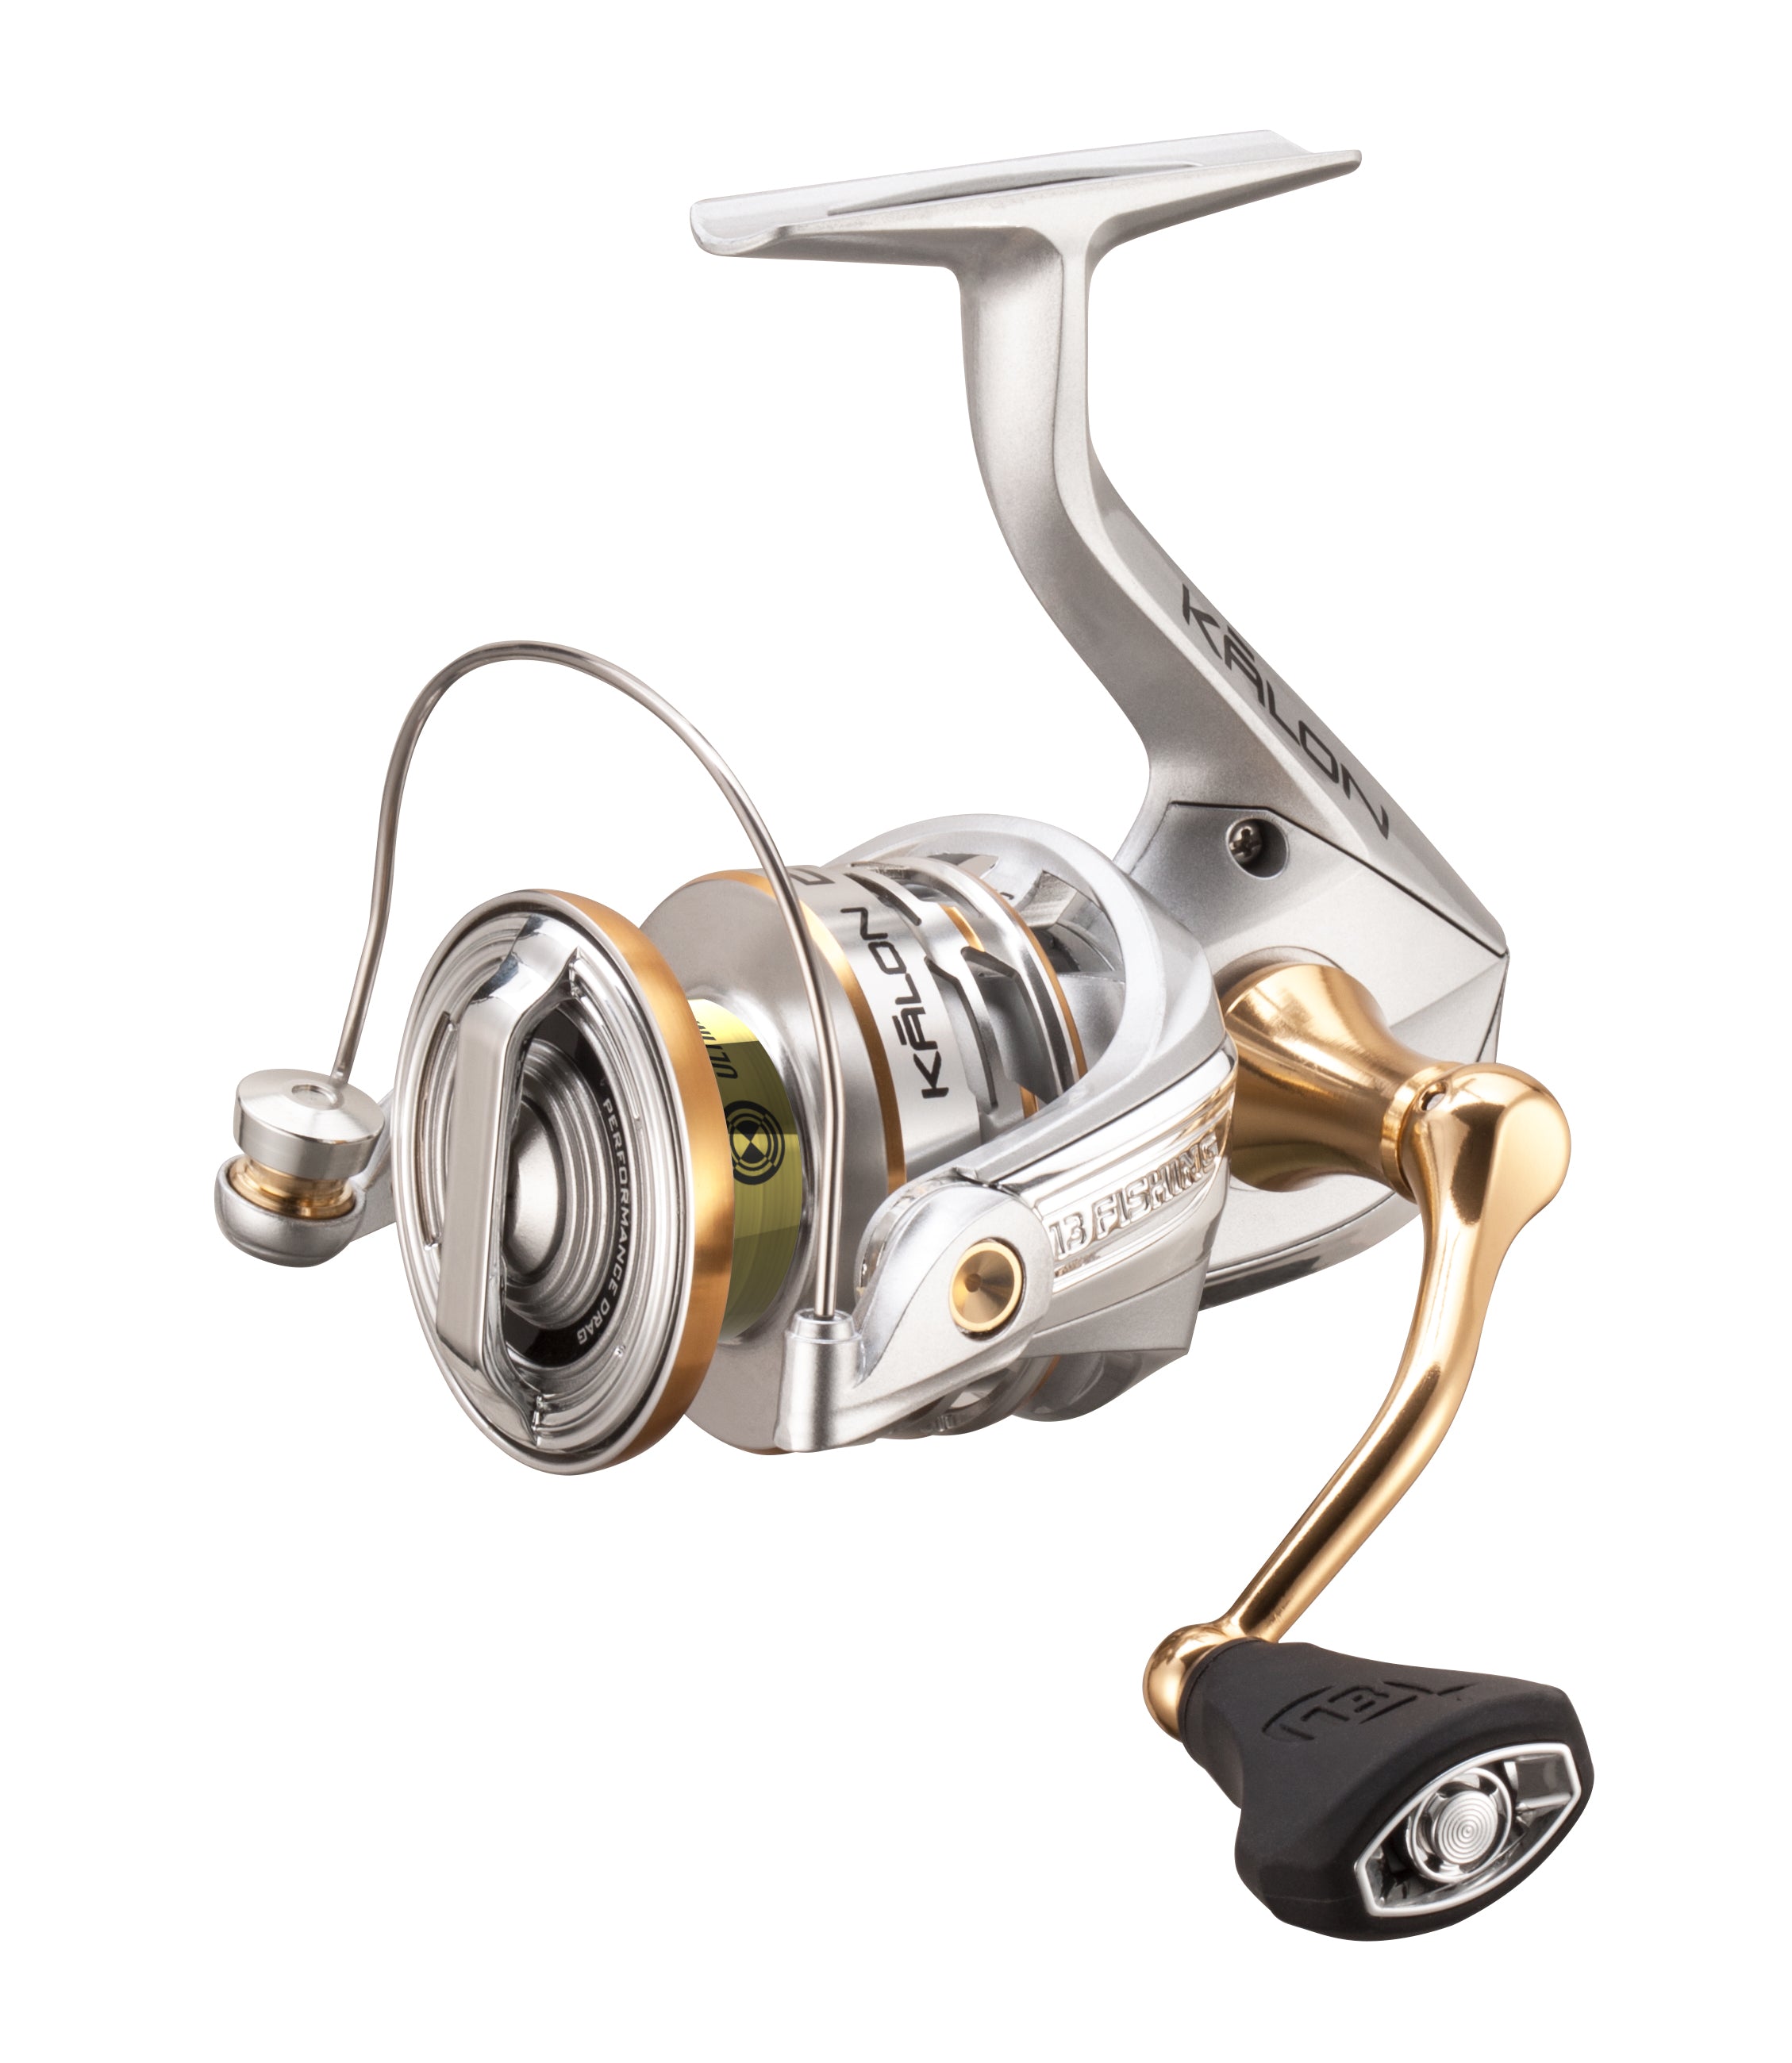 The Golden Age of Spin Casting Fishing Reels--and Green, Red